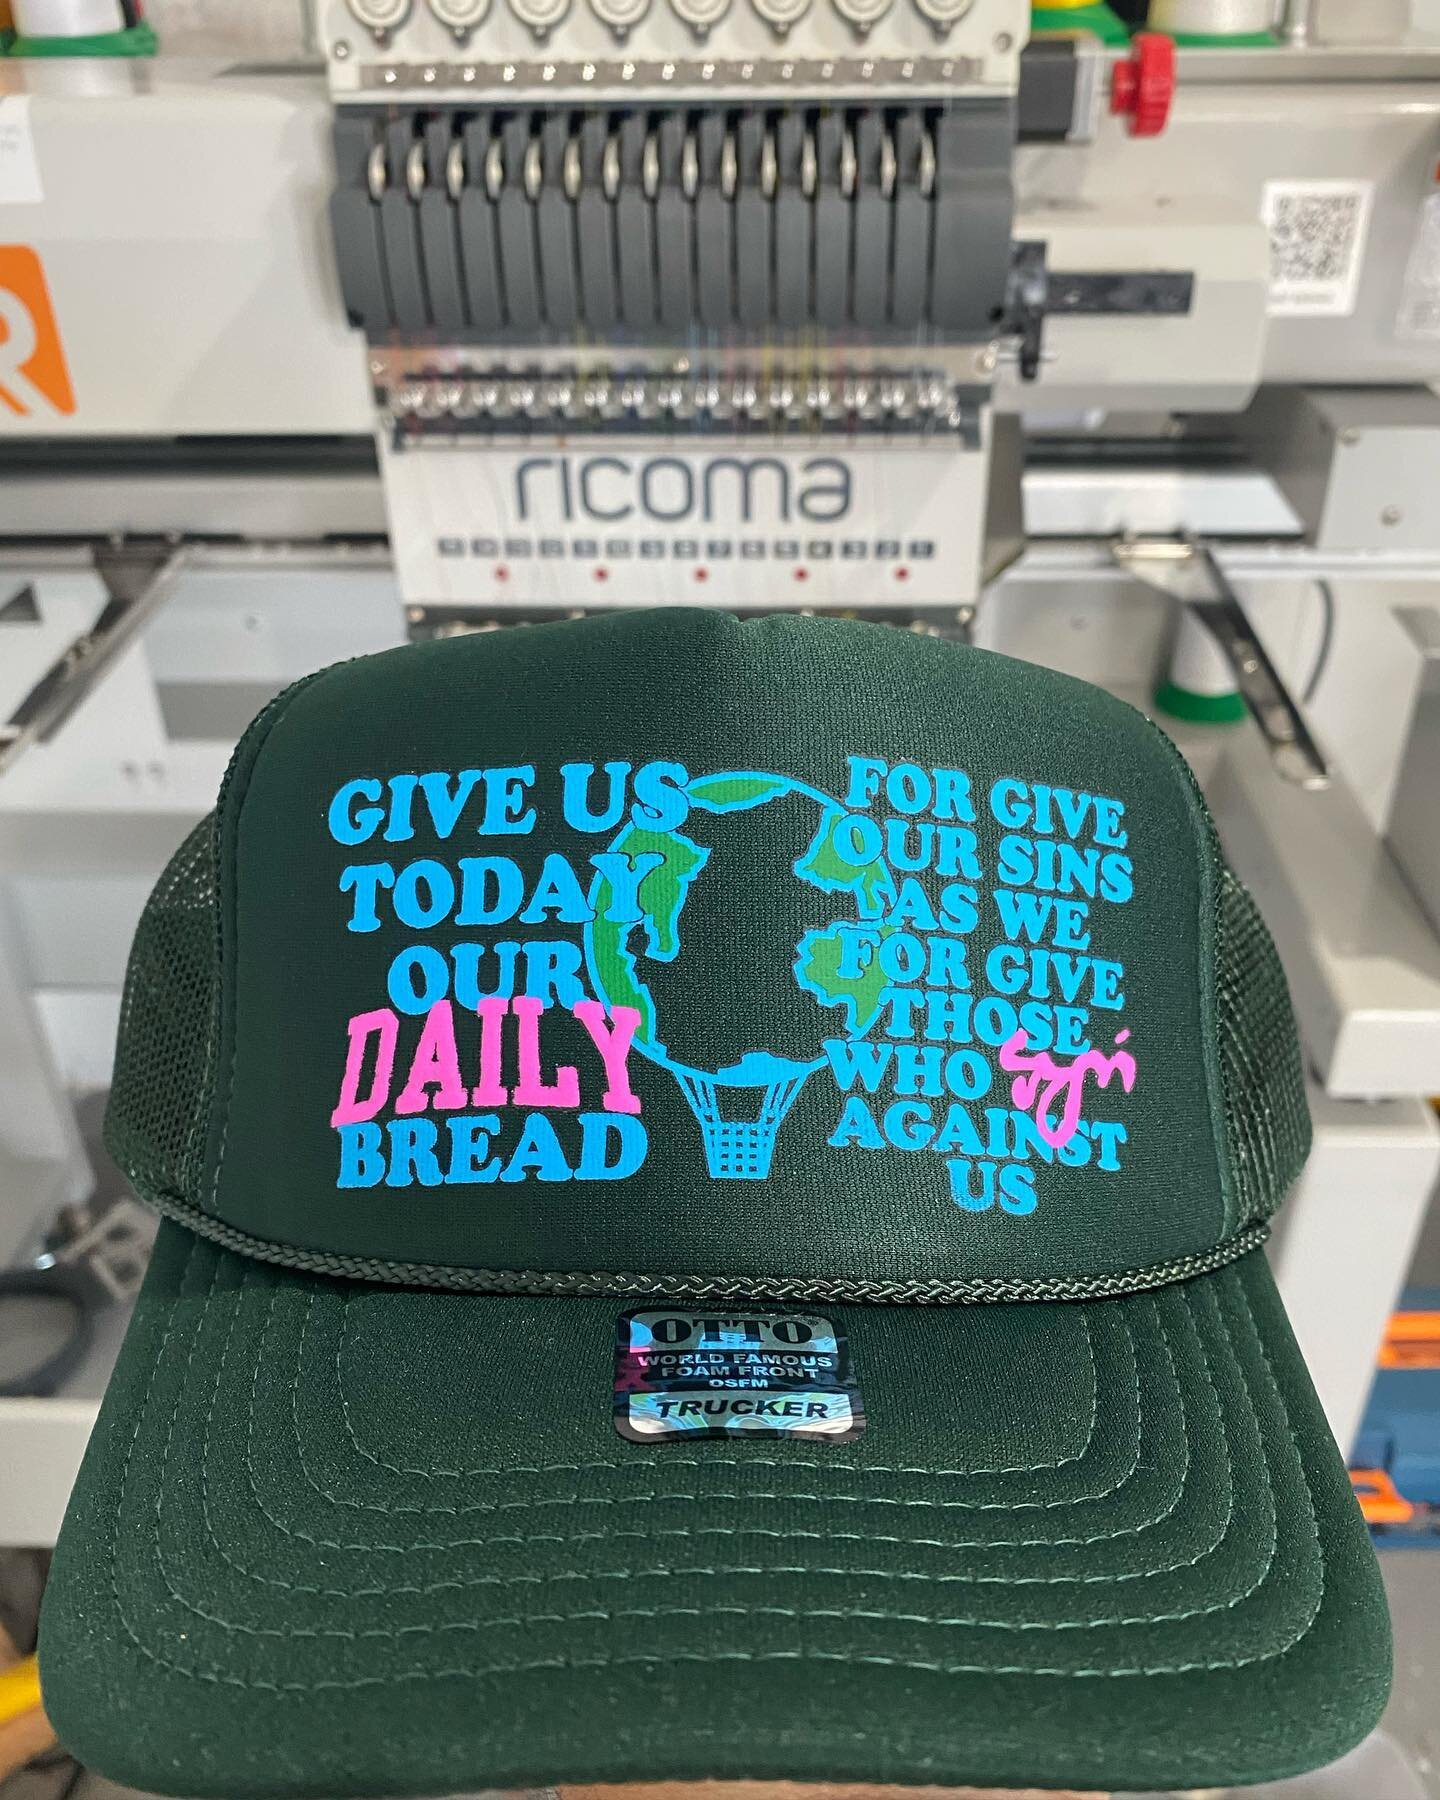 Screen print heat transfer hats for @dailymia and @syndicatelosangeles !! Live screen printing event tomorrow (Saturday) at Daily 5/12, 11am - 7pm or till supplies last. Free shirts! Pull up! 
&bull;
#screenprinting #heattransfer #miamiscreenprinting